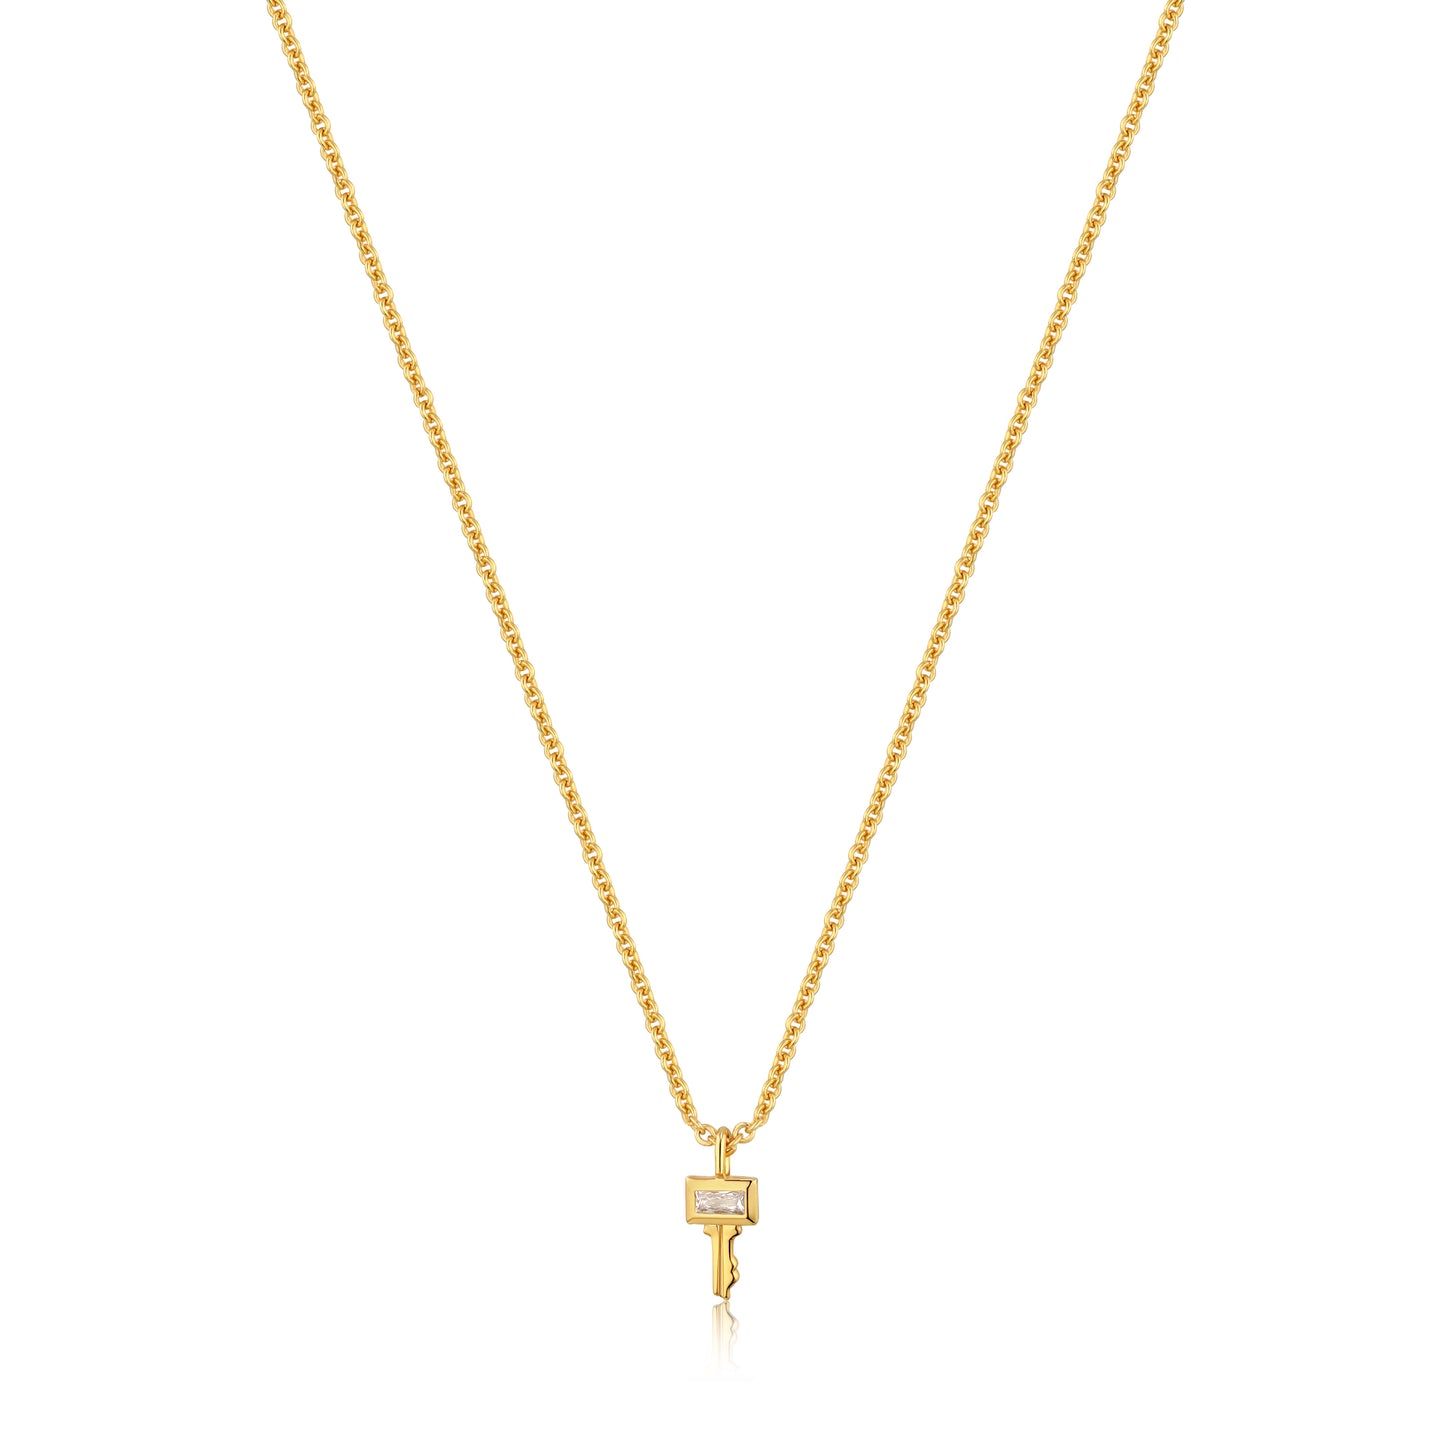 ANIA HAIE ANIA HAIE - Gold Key Necklace available at The Good Life Boutique